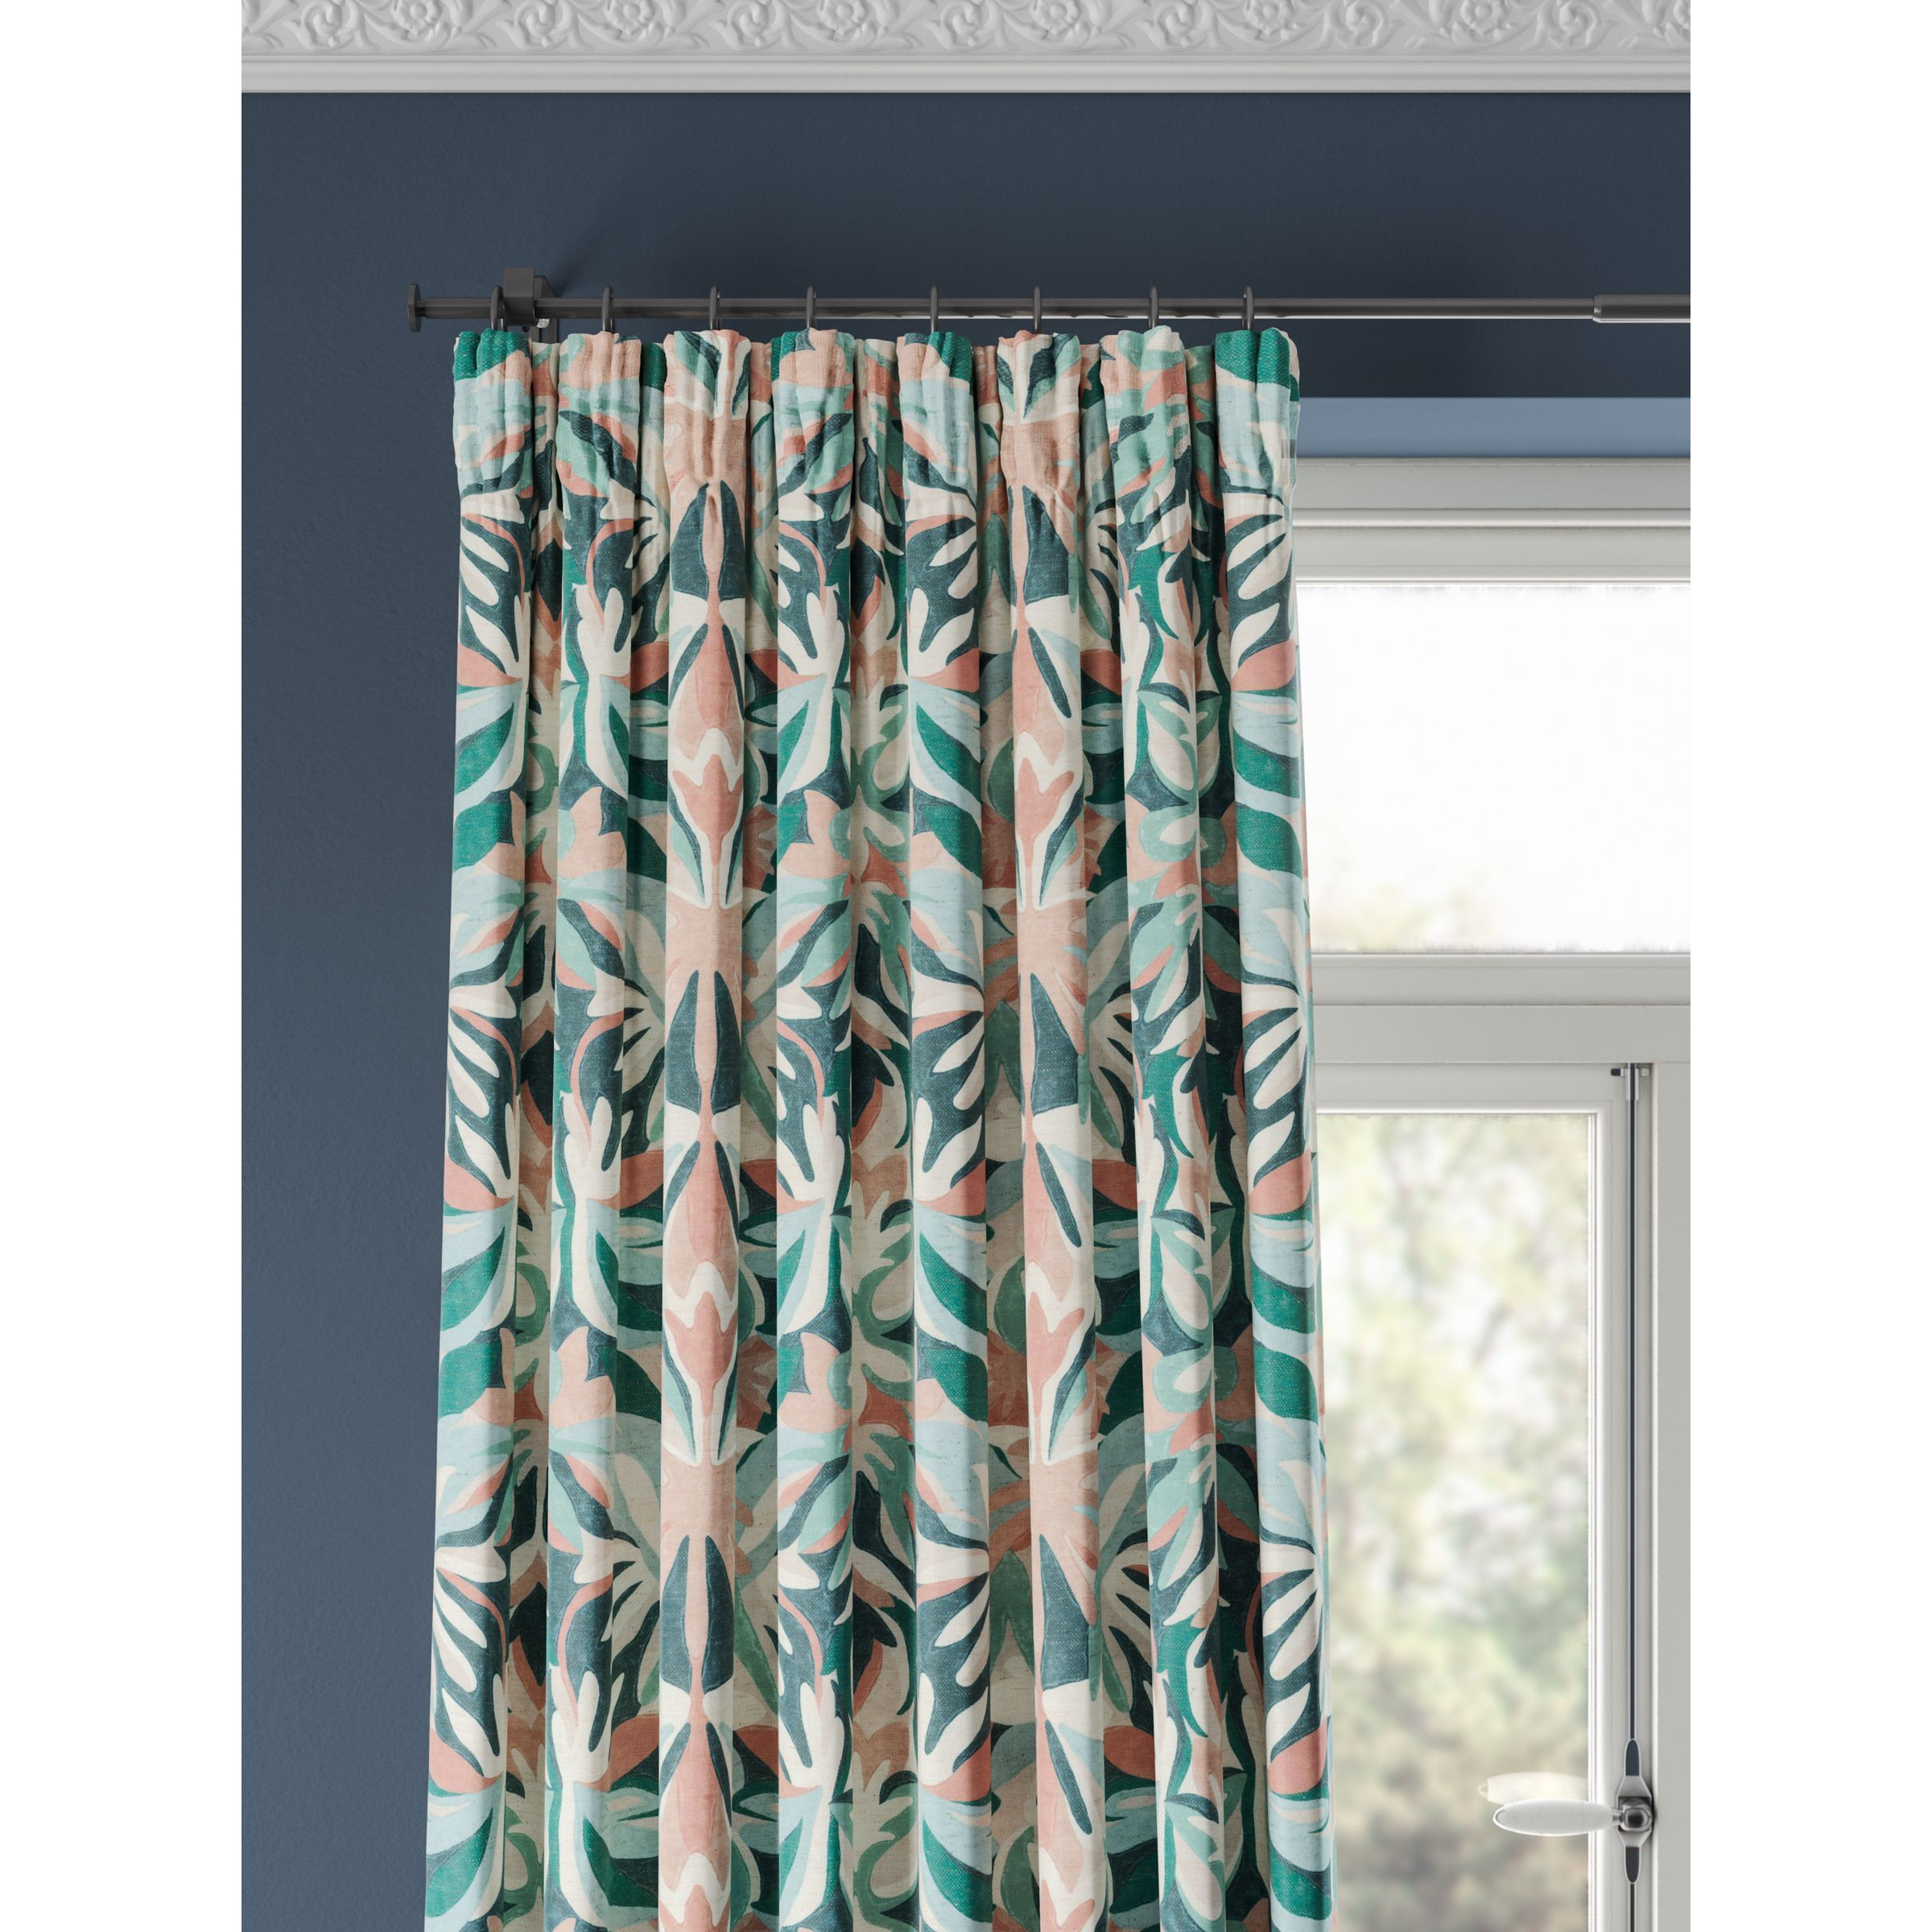 Harlequin Melora Pair Lined Pencil Pleat Curtains, Teal/Pink - image 1